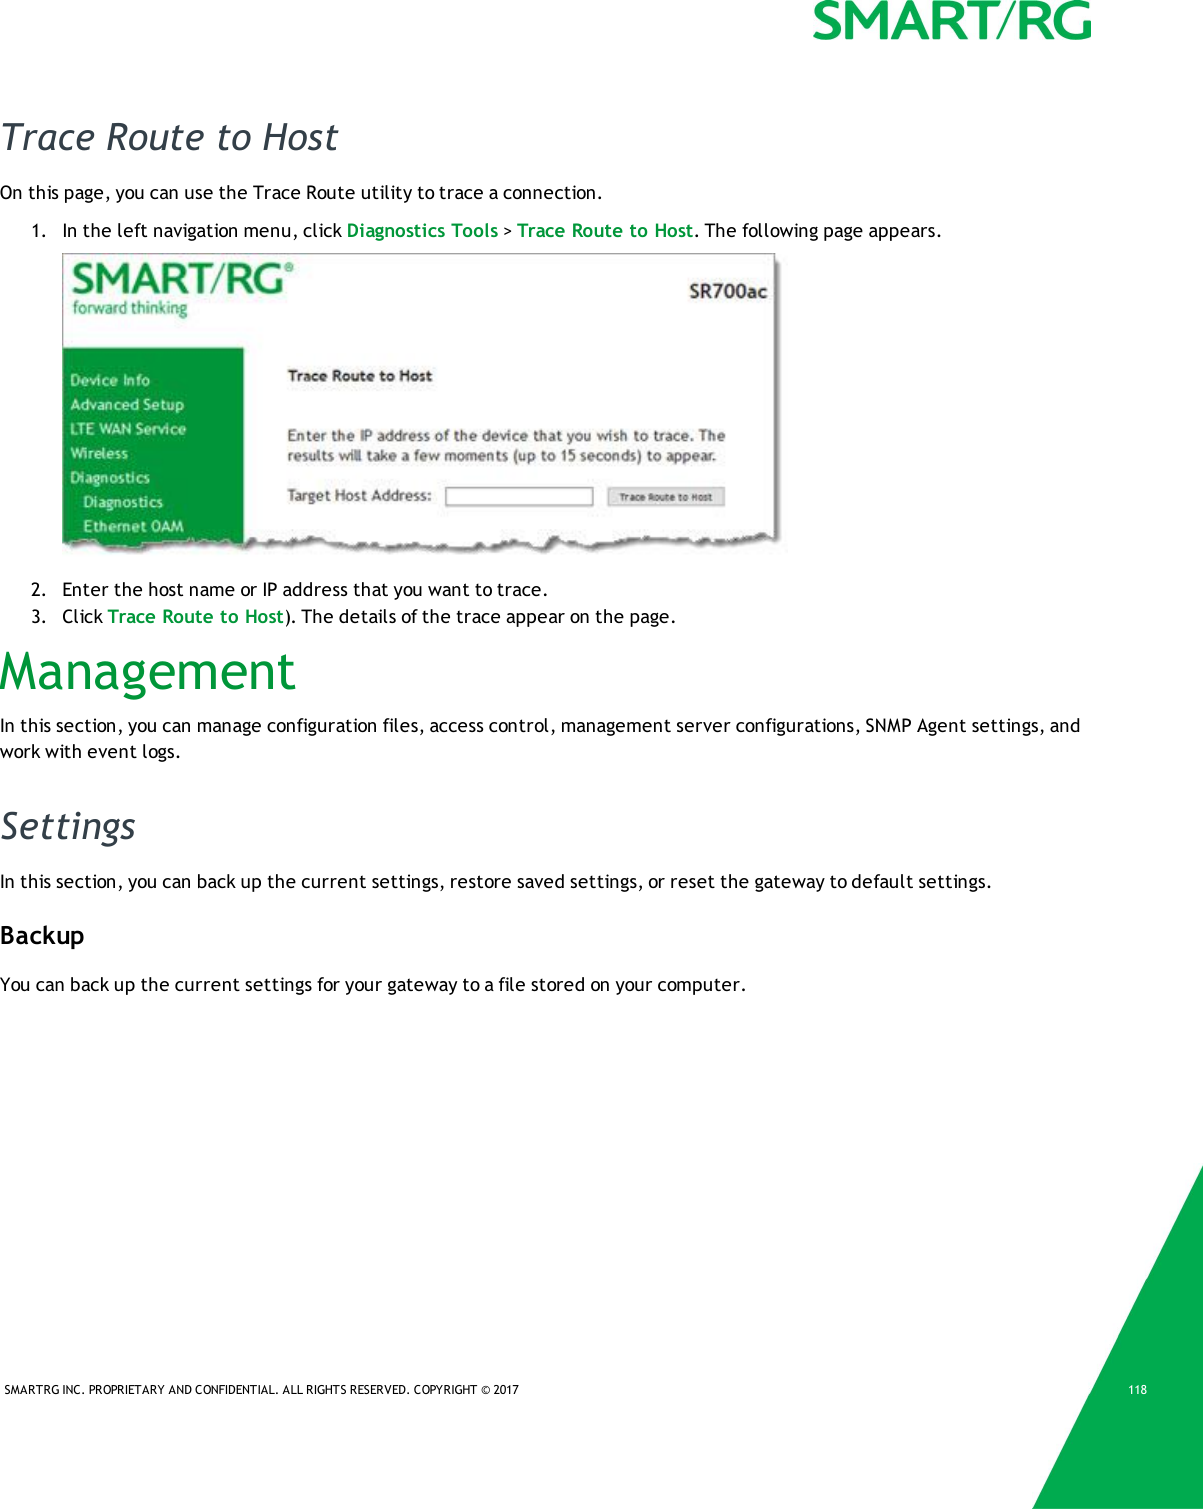 SMARTRG INC. PROPRIETARY AND CONFIDENTIAL. ALL RIGHTS RESERVED. COPYRIGHT © 2017 118Trace Route to HostOn this page, you can use the Trace Route utility to trace a connection.1. In the left navigation menu, click Diagnostics Tools &gt;Trace Route to Host. The following page appears.2. Enter the host name or IP address that you want to trace.3. Click Trace Route to Host). The details of the trace appear on the page.ManagementIn this section, you can manage configuration files, access control, management server configurations, SNMP Agent settings, andwork with event logs.SettingsIn this section, you can back up the current settings, restore saved settings, or reset the gateway to default settings.BackupYou can back up the current settings for your gateway to a file stored on your computer.